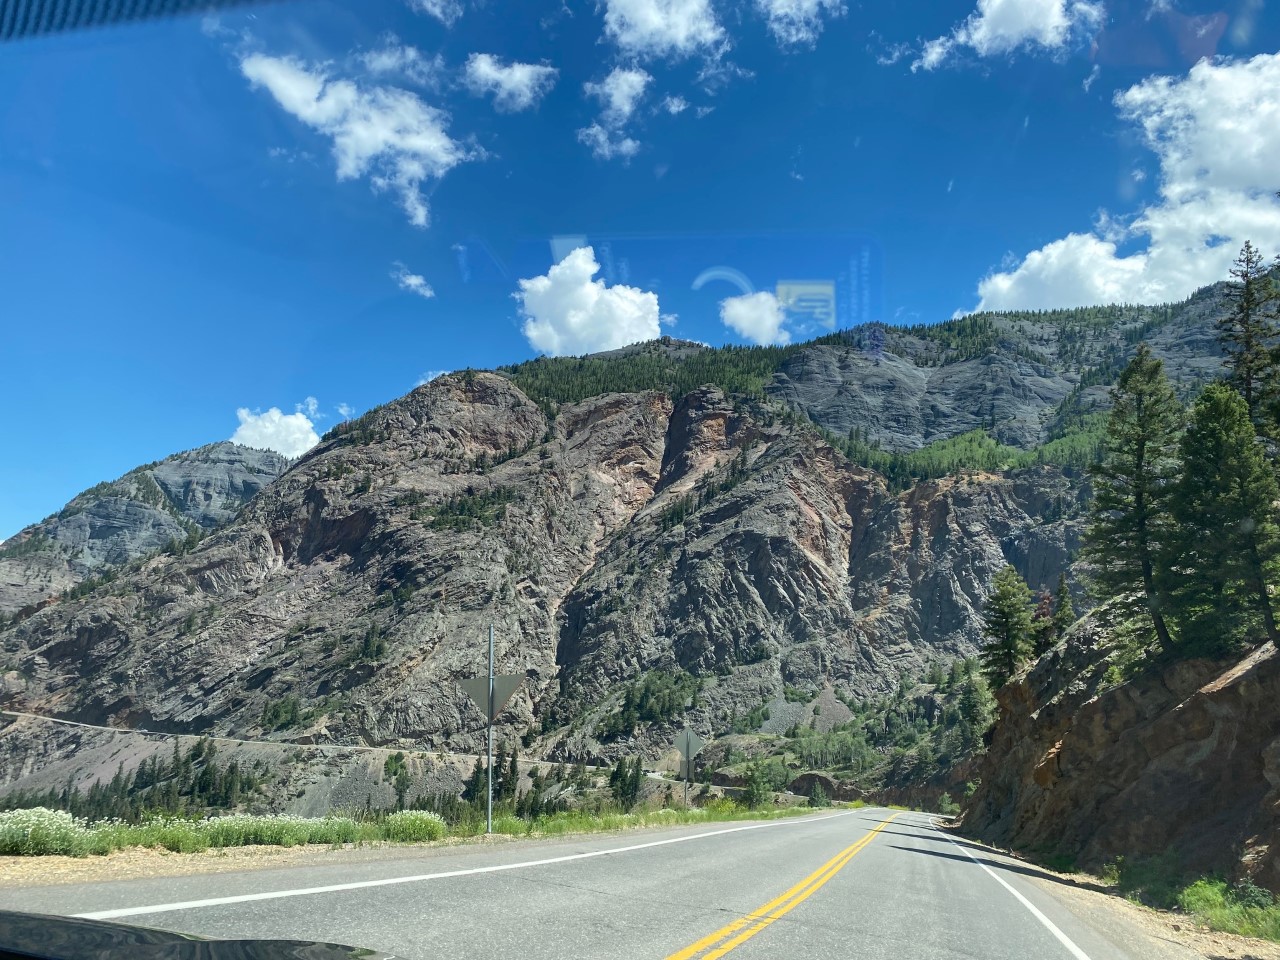 Million Dollar Highway as it winds through mountain tops into Ouray, Colorado